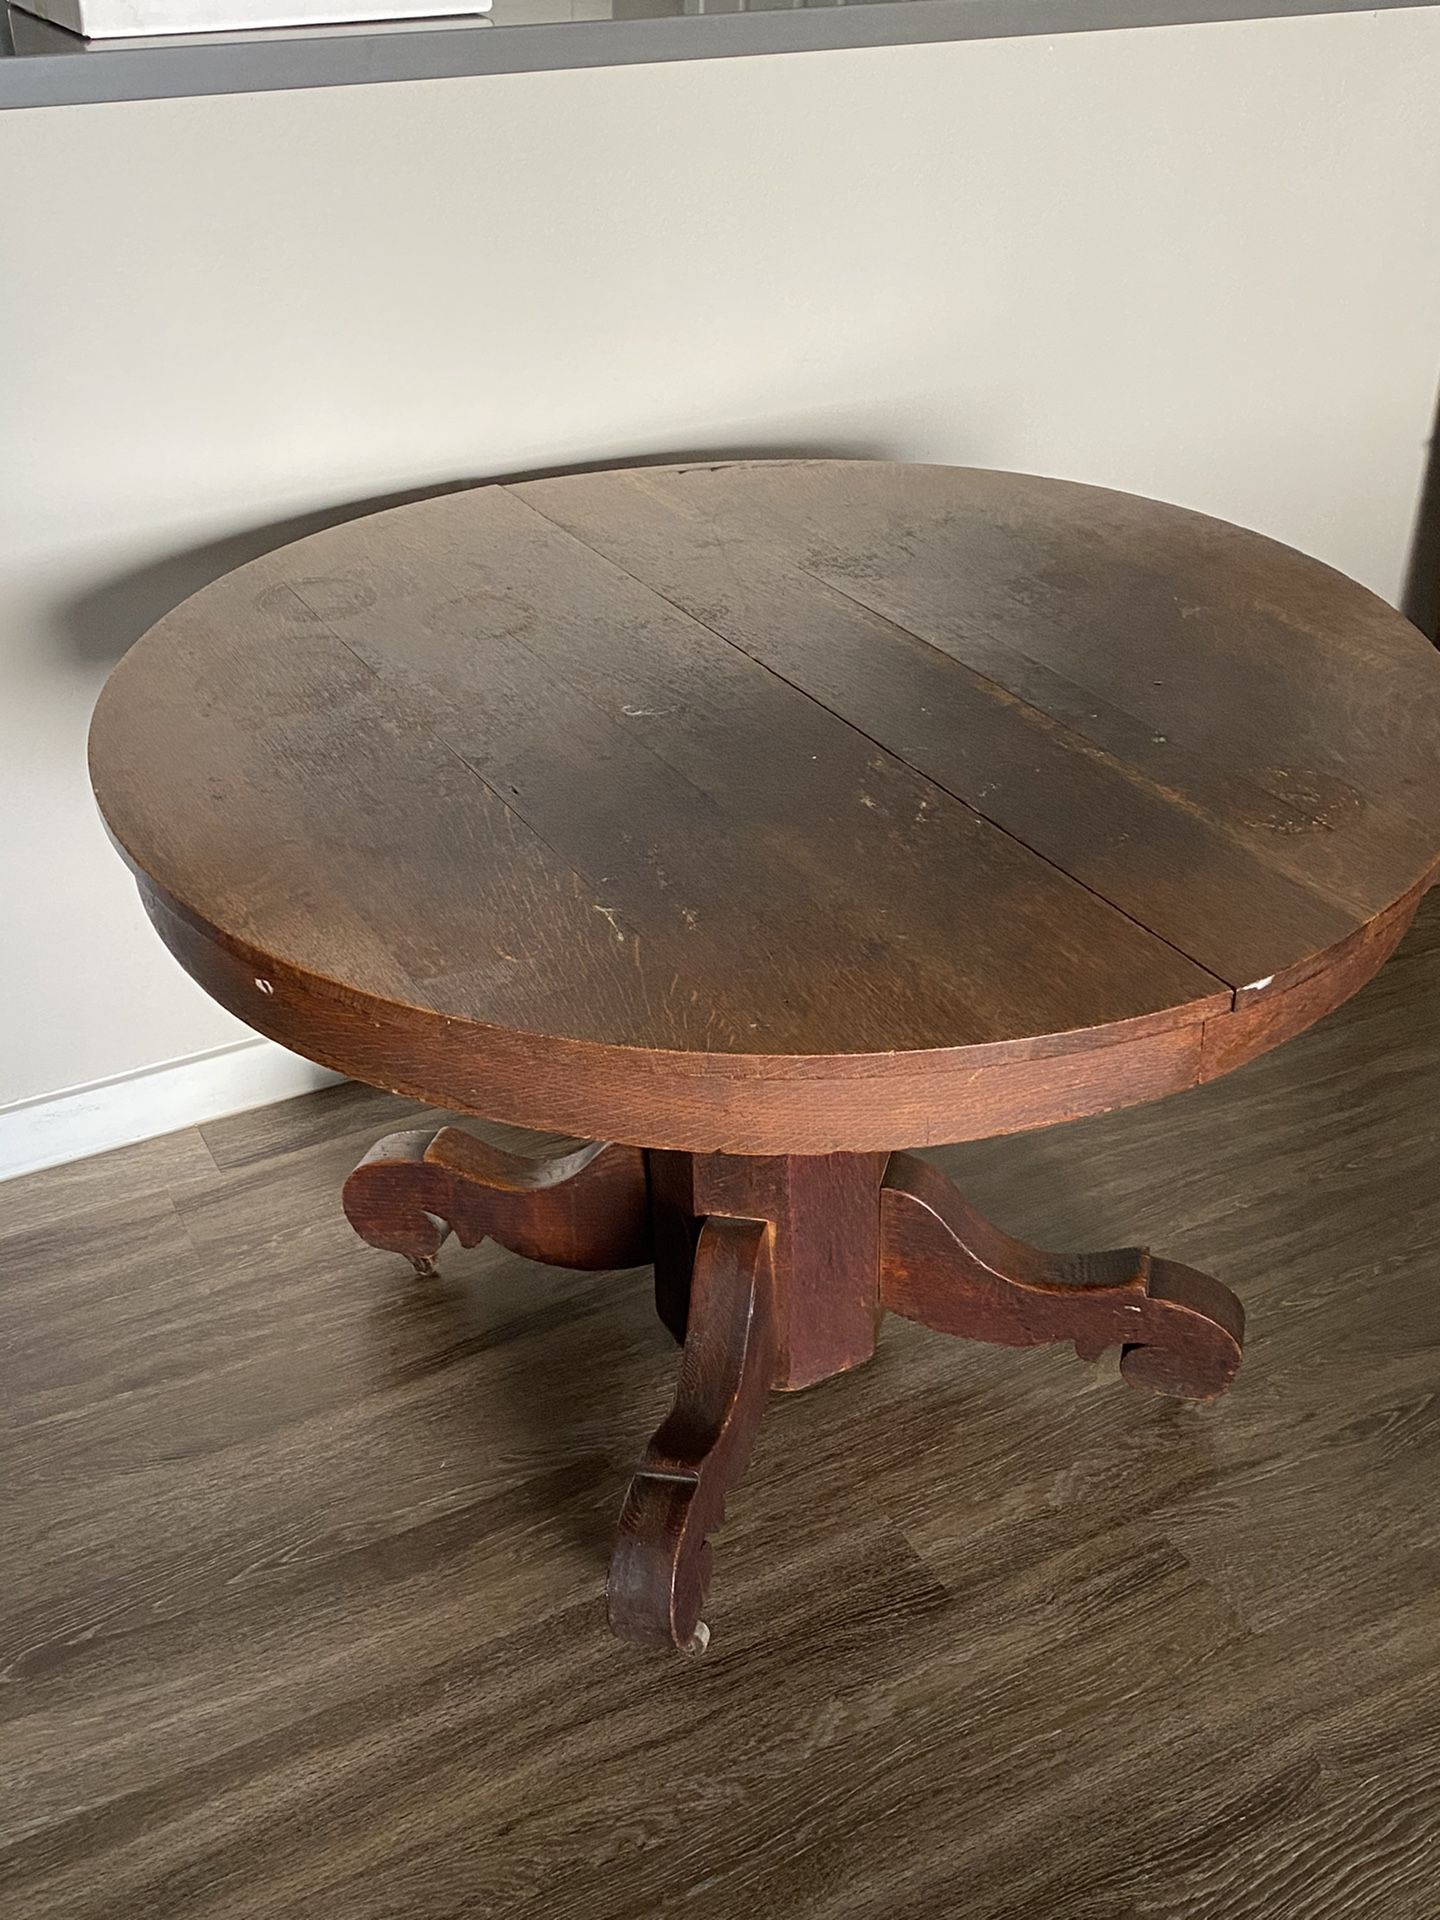 Wooden antique dining table